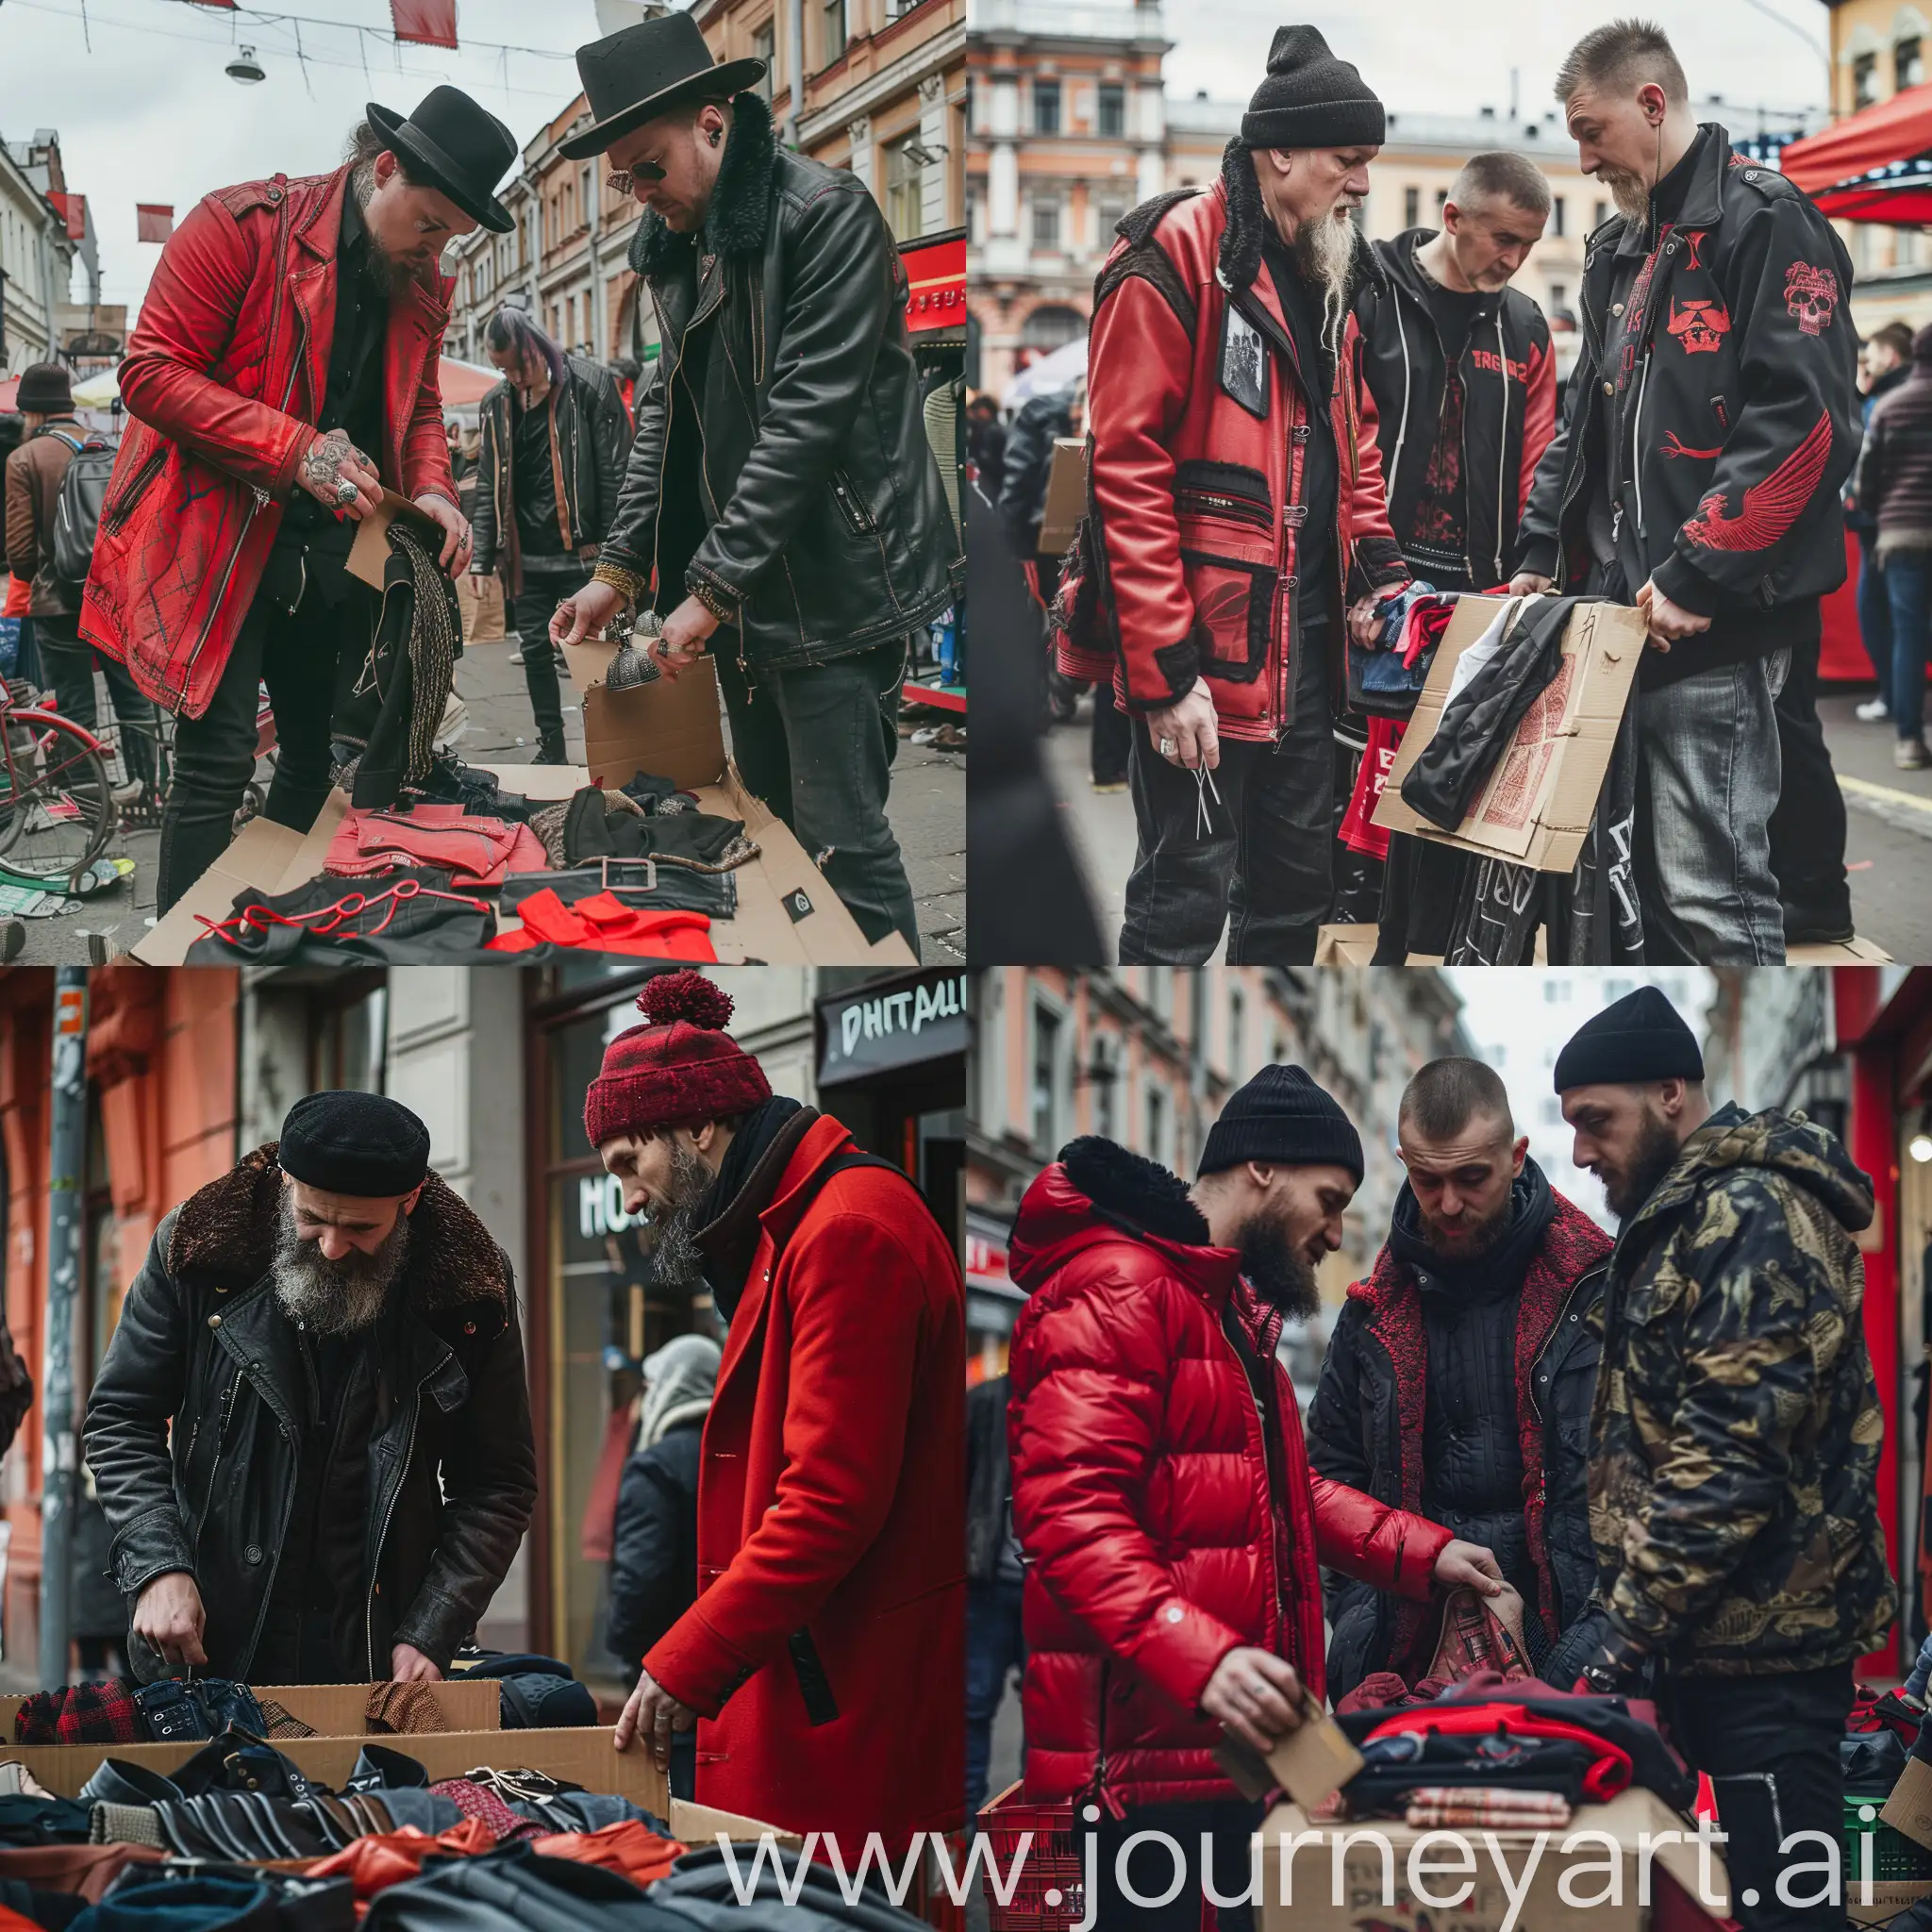 Rugged brutal countercultural gentlemen picking out stylish clothes at the old market in center of Saint-Petersburg, standing on cardboard, red and black colour scheme, no neon, dramatic lighting, cinematic detailing